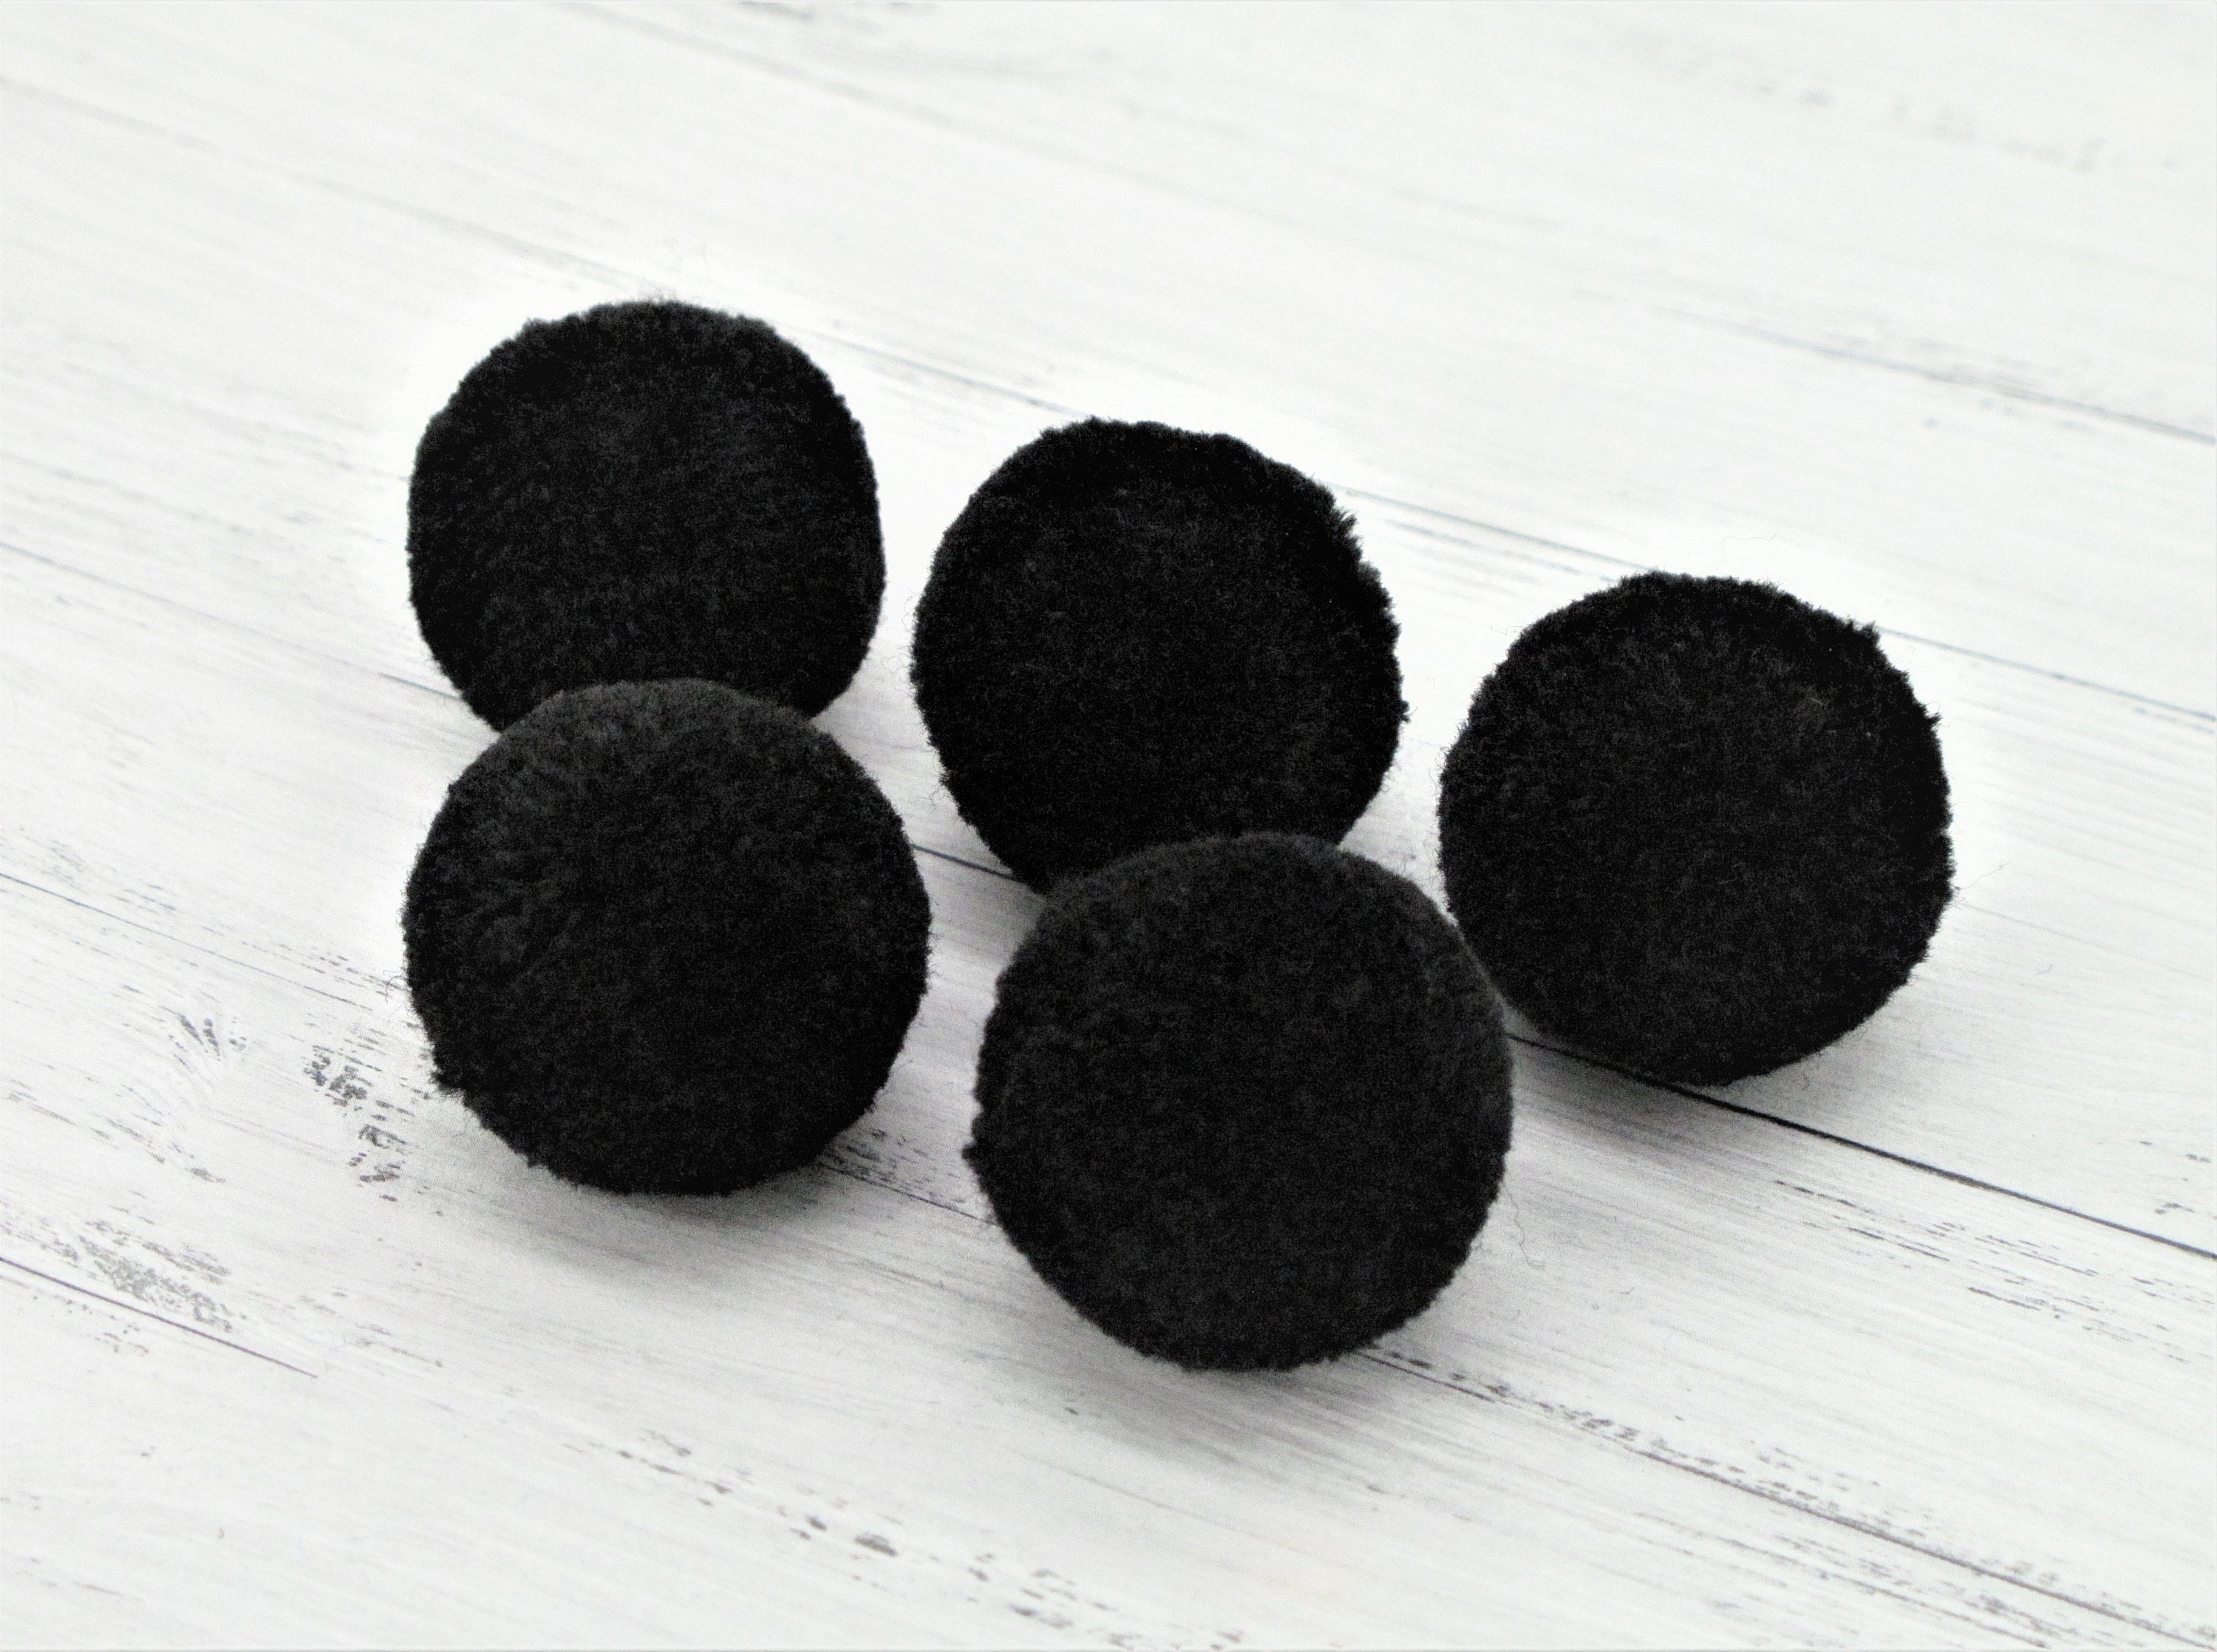 100pcs 25mm Cotton Yarn Mini Pompoms For Crafts And Jewelry Making Black